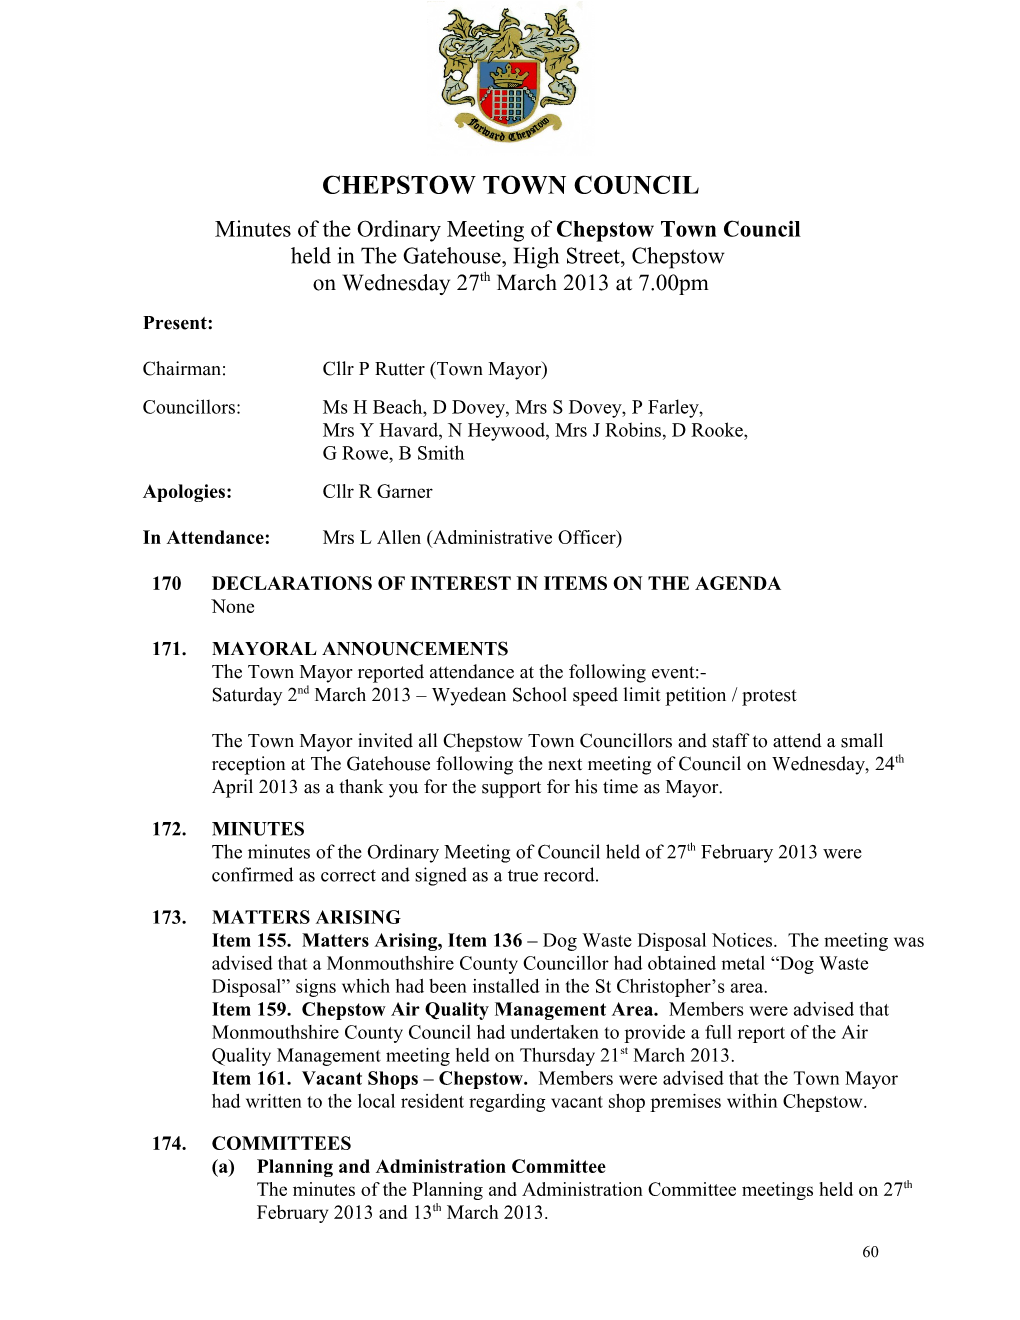 Minutes of the Ordinary Meeting of Chepstow Town Council